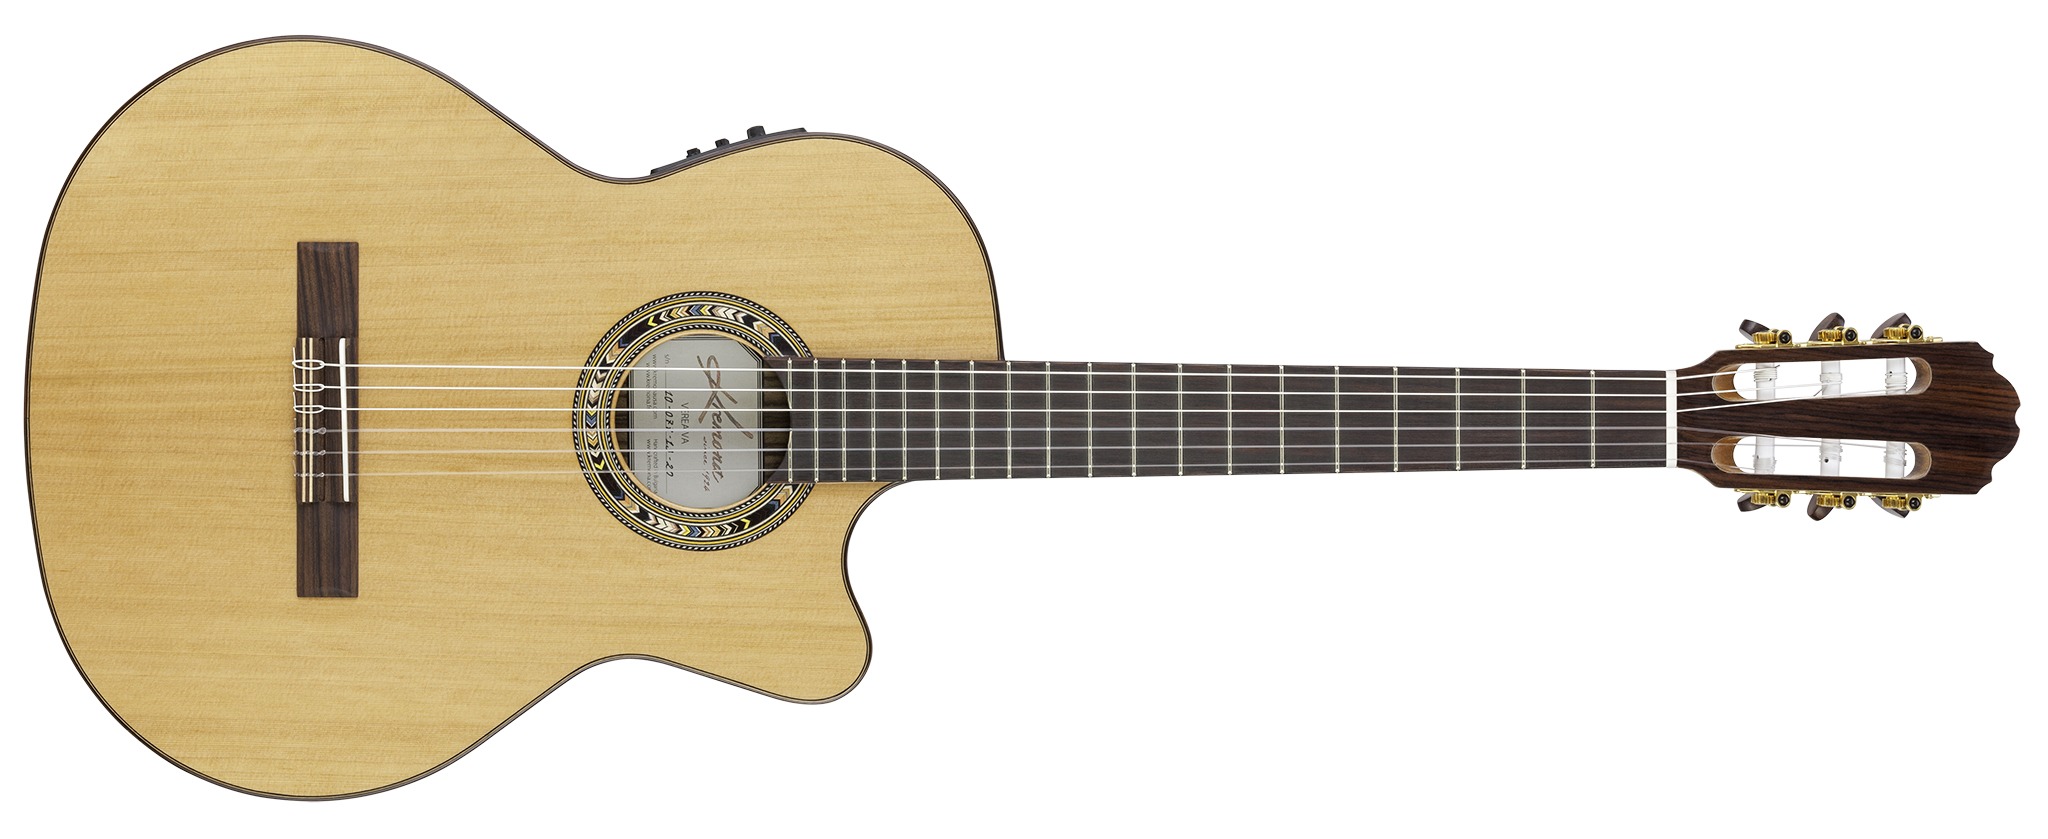 Verea - Learn about performer level nylon-string guitar